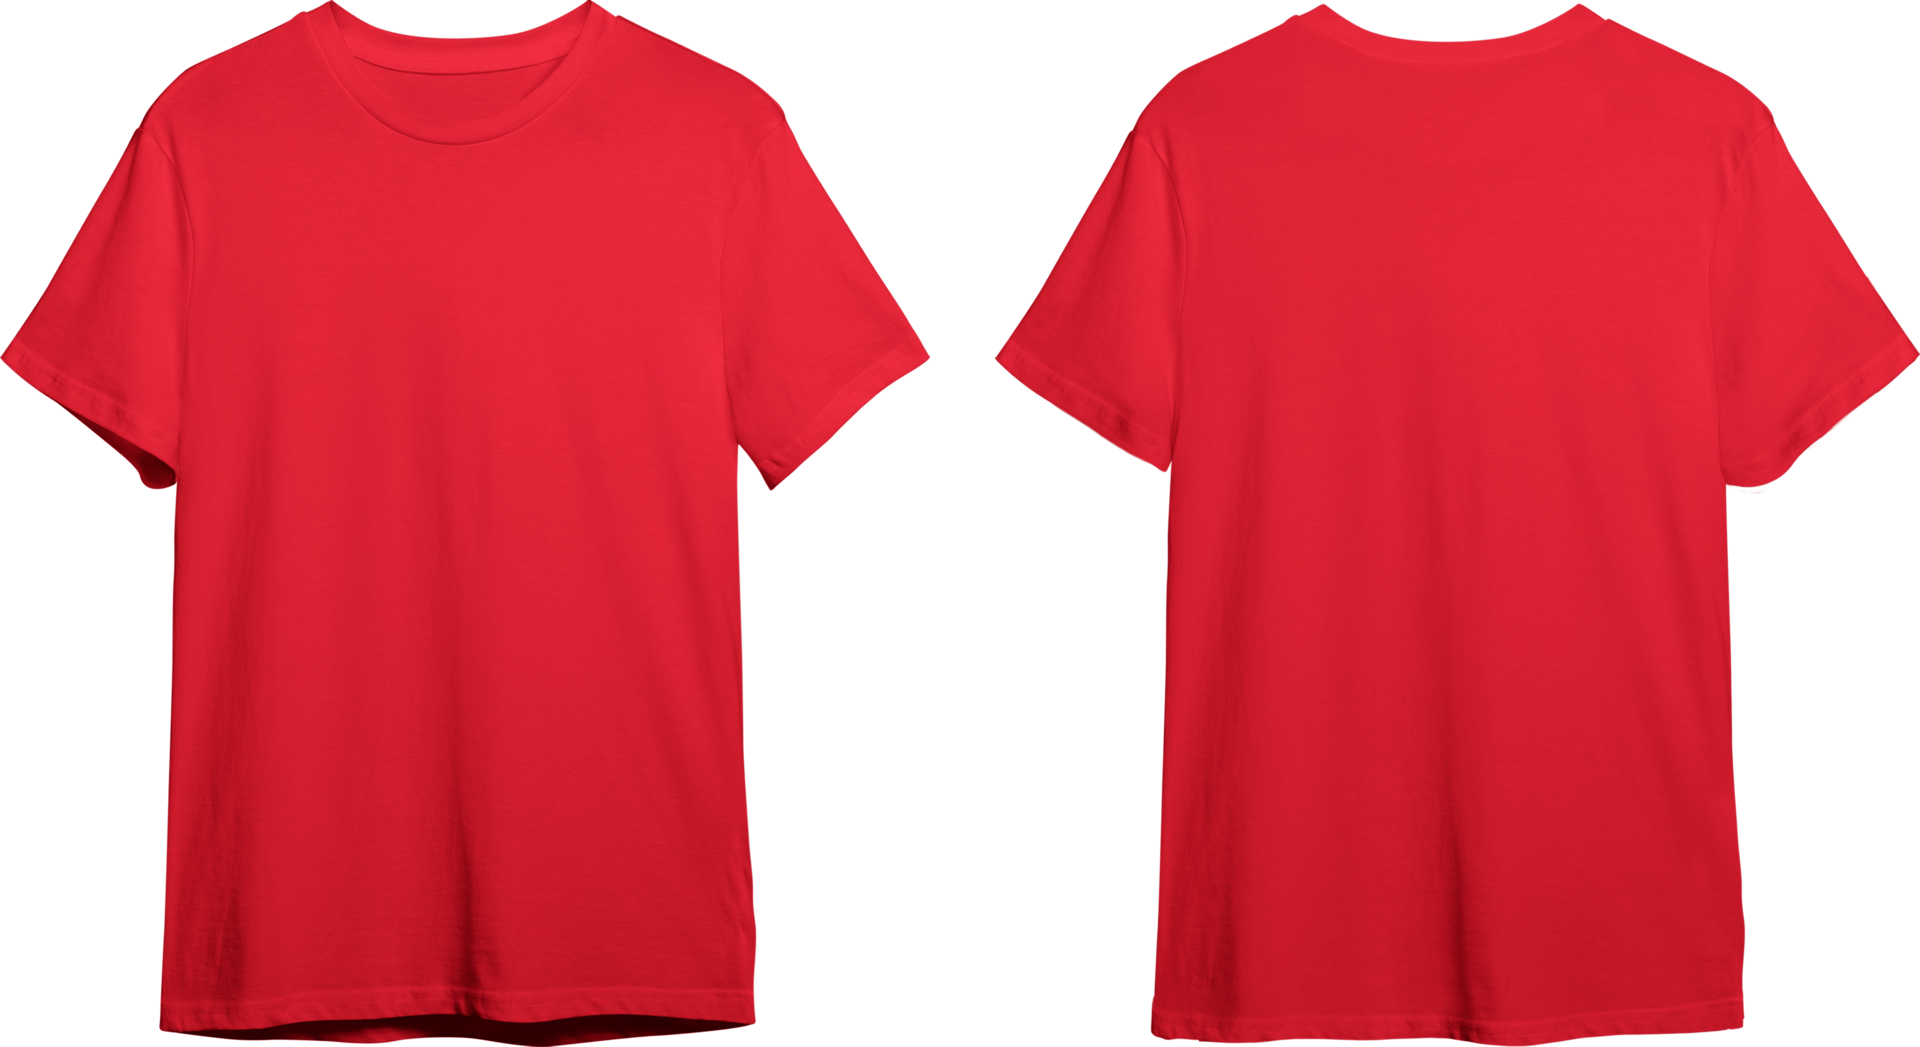 Red men's classic t-shirt front and back 23370456 PNG